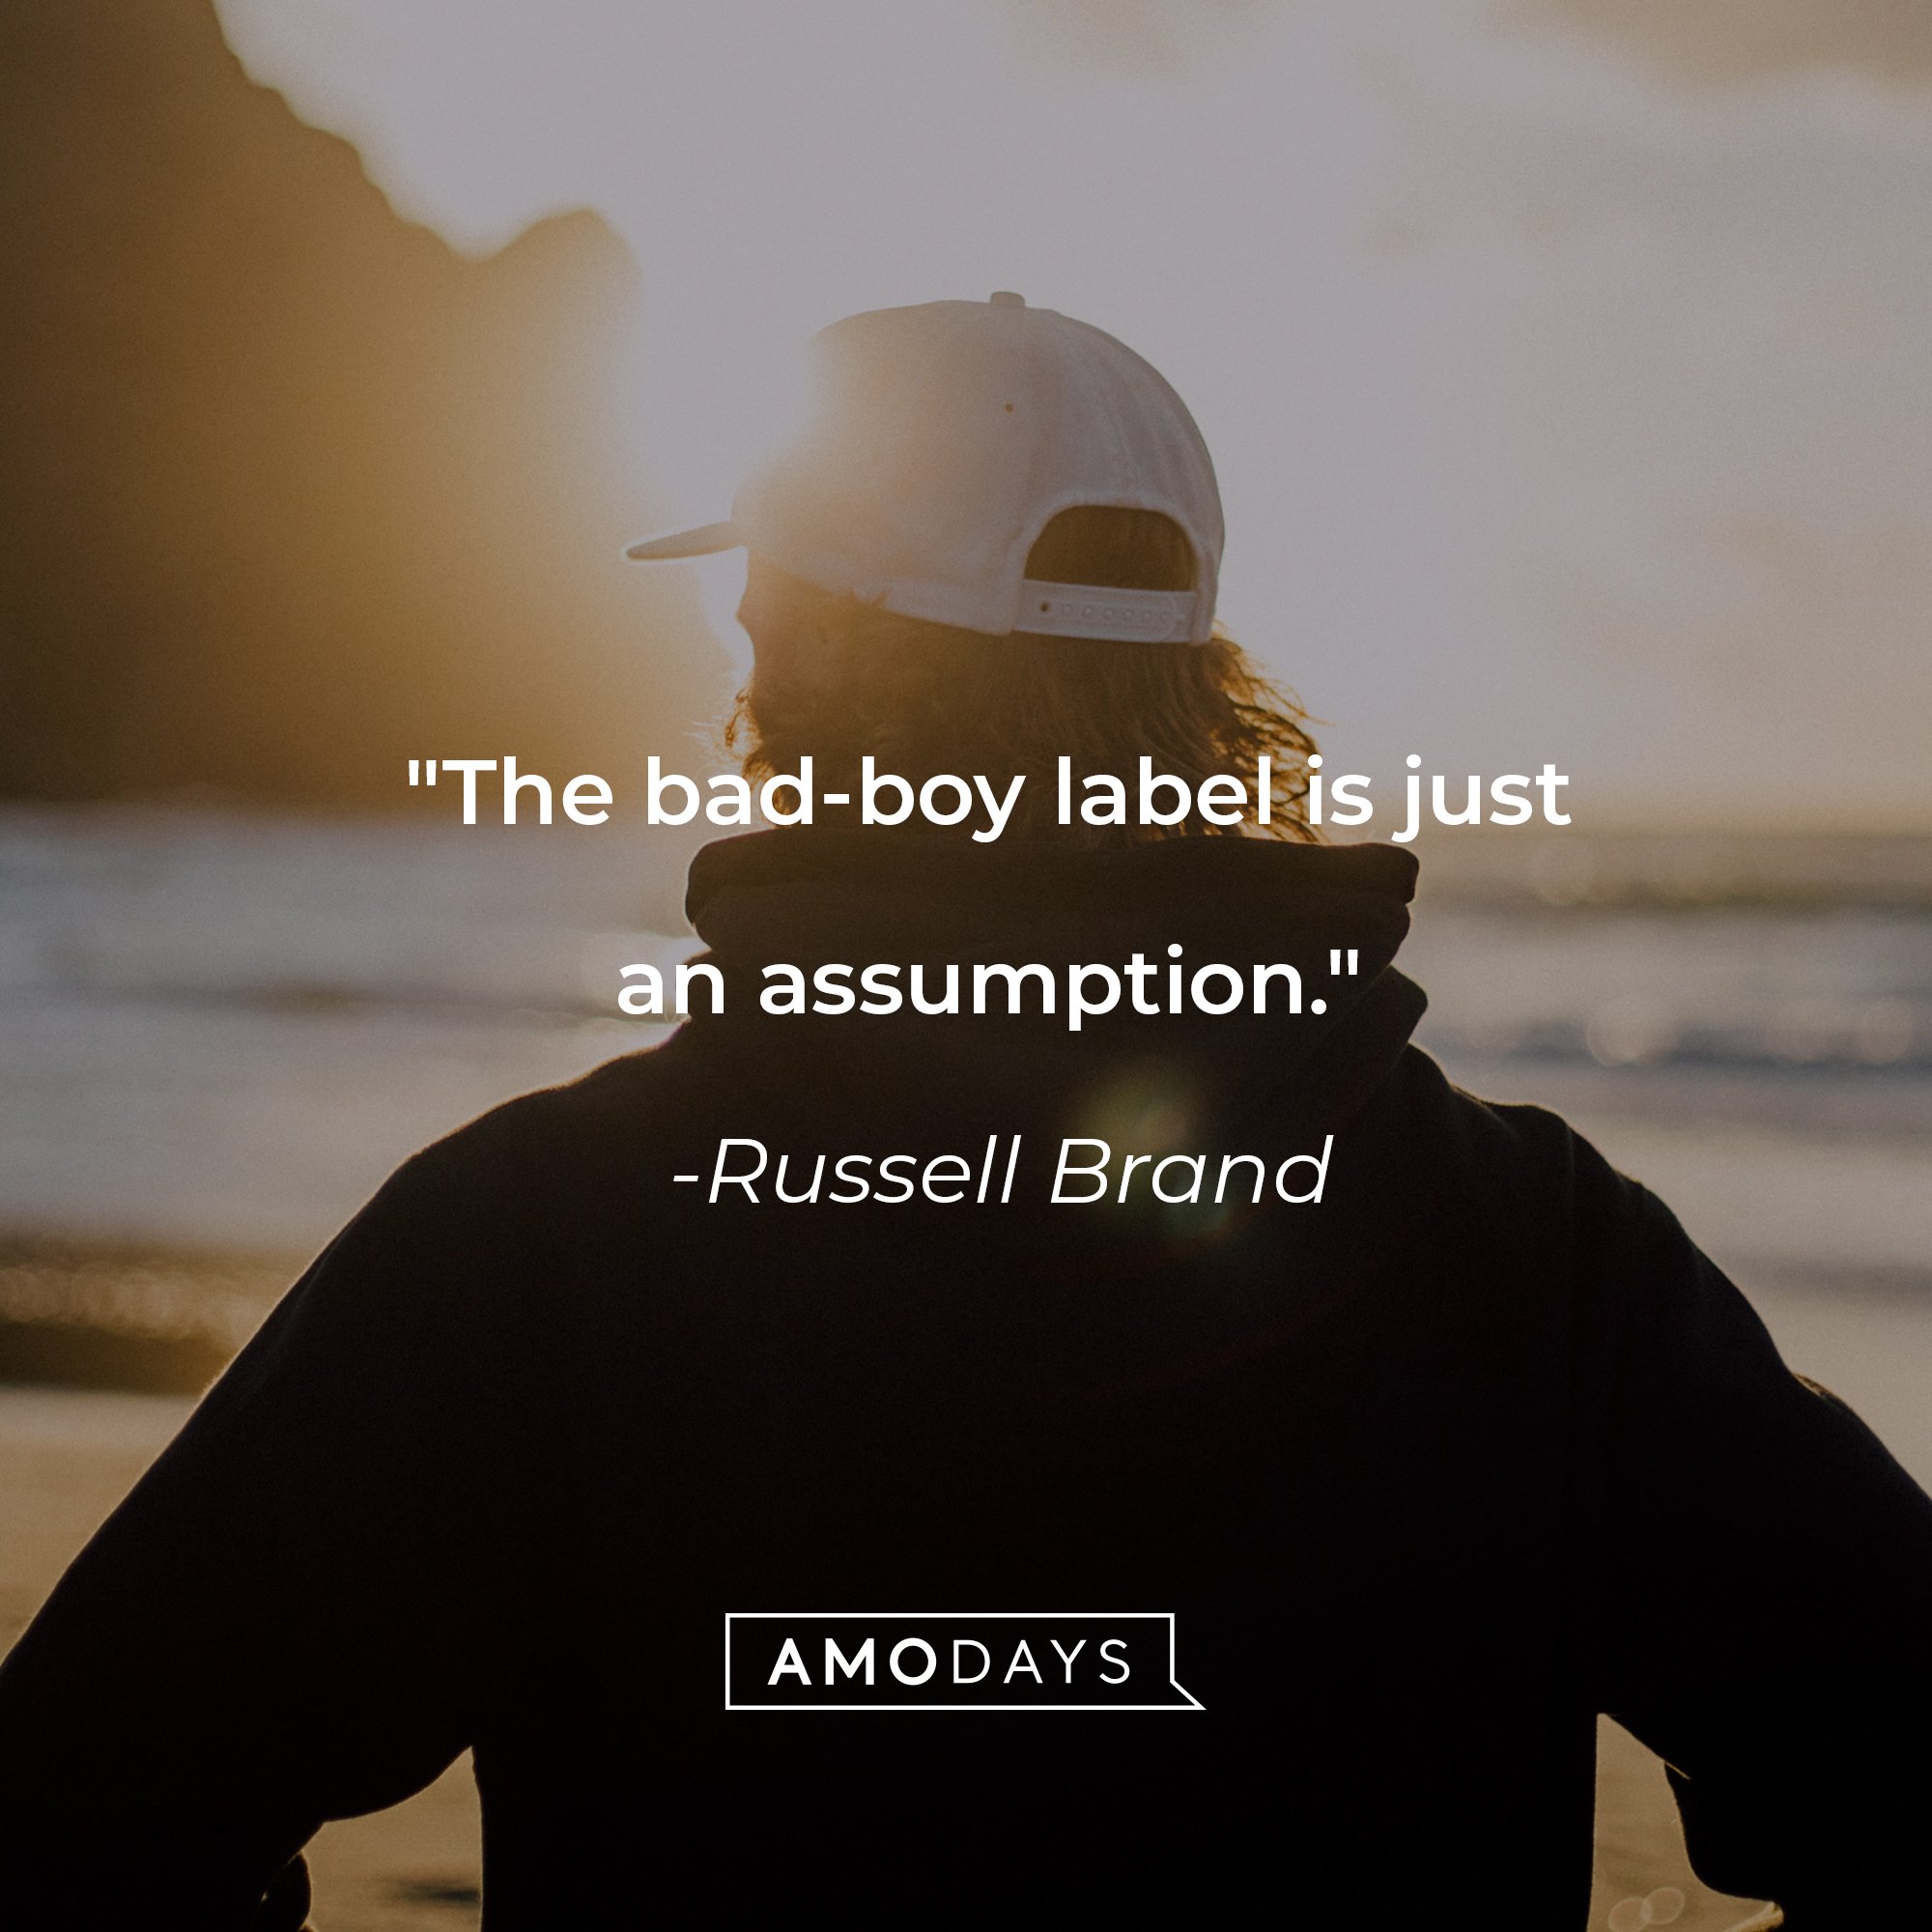 Russell Brand's quote: "The bad-boy label is just an assumption." | Image: AmoDays